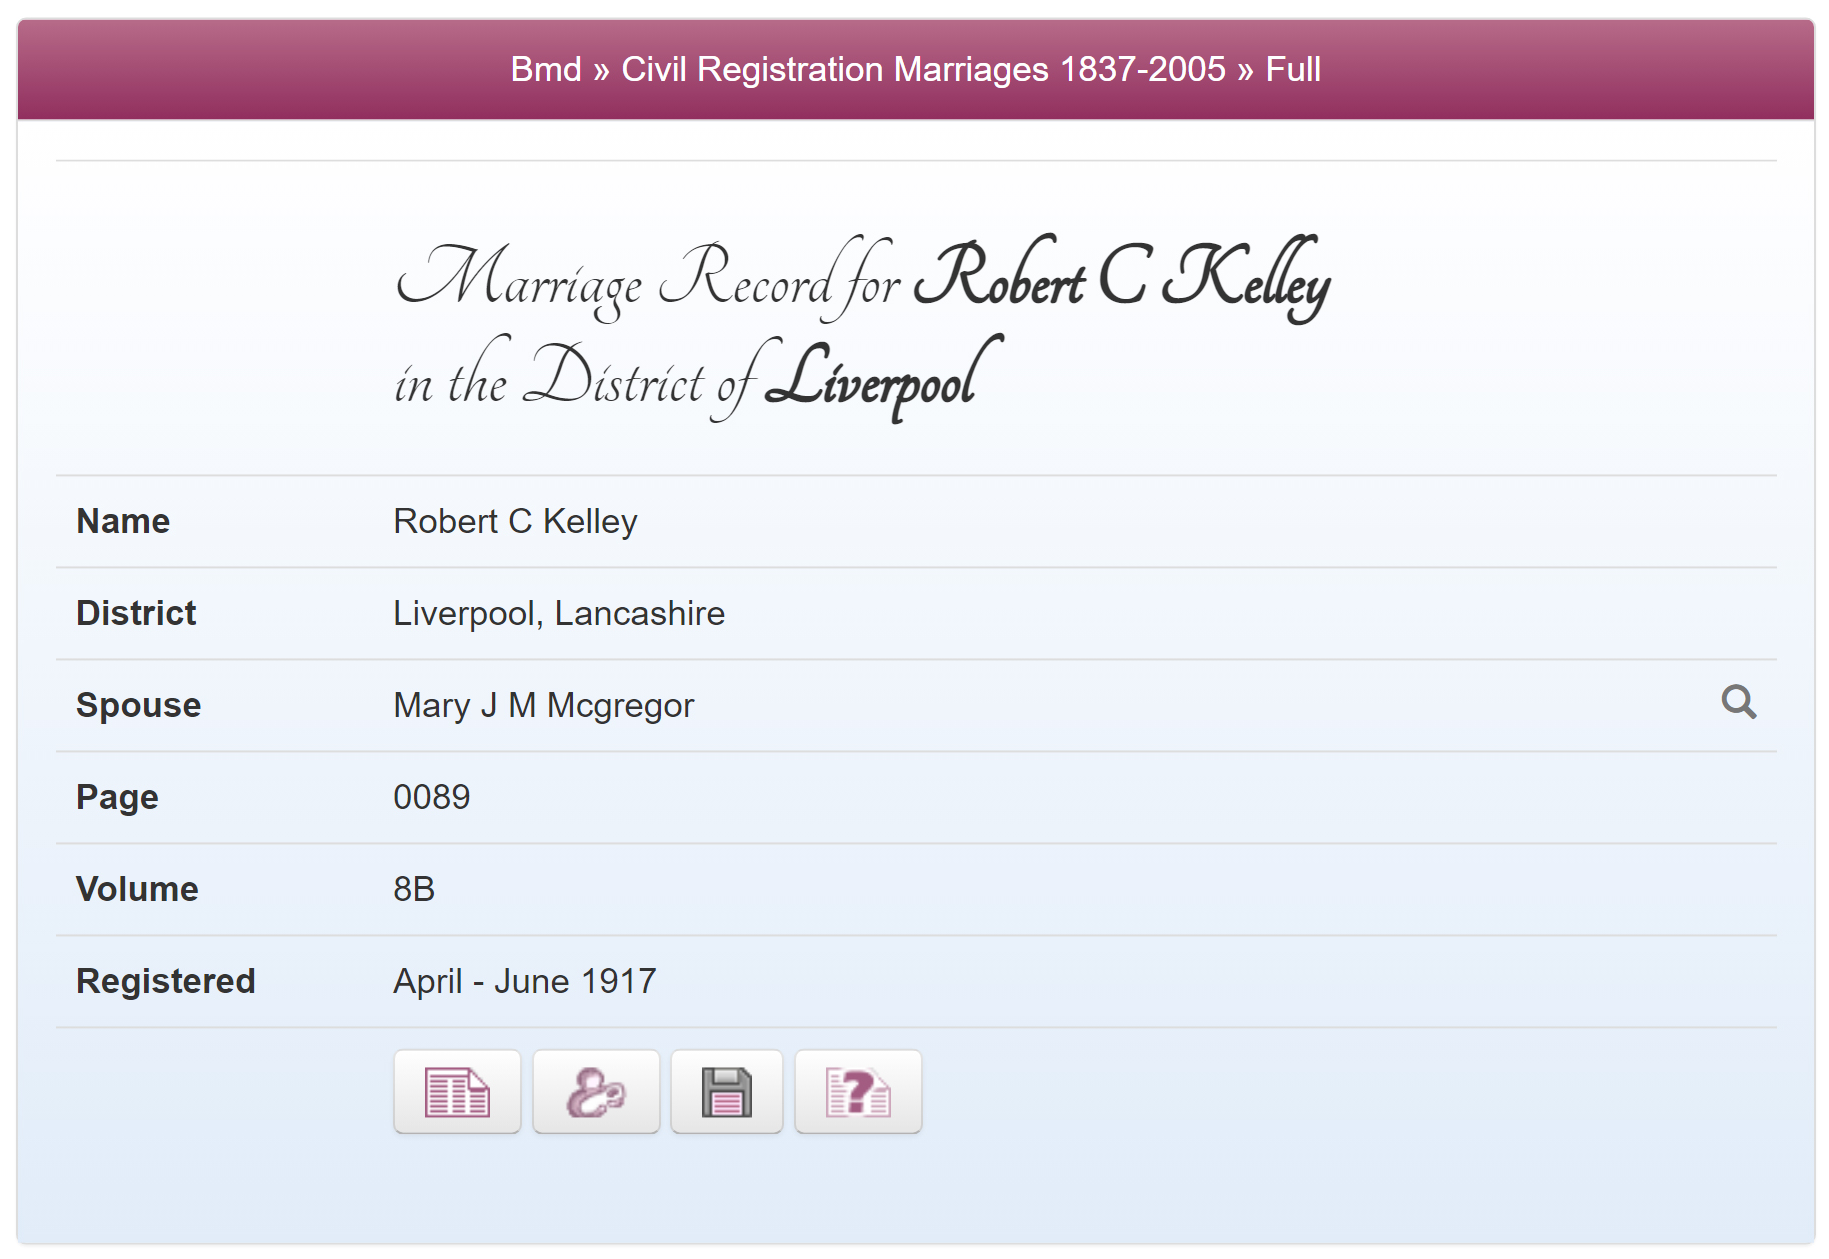 Robert and Jessie's marriage record